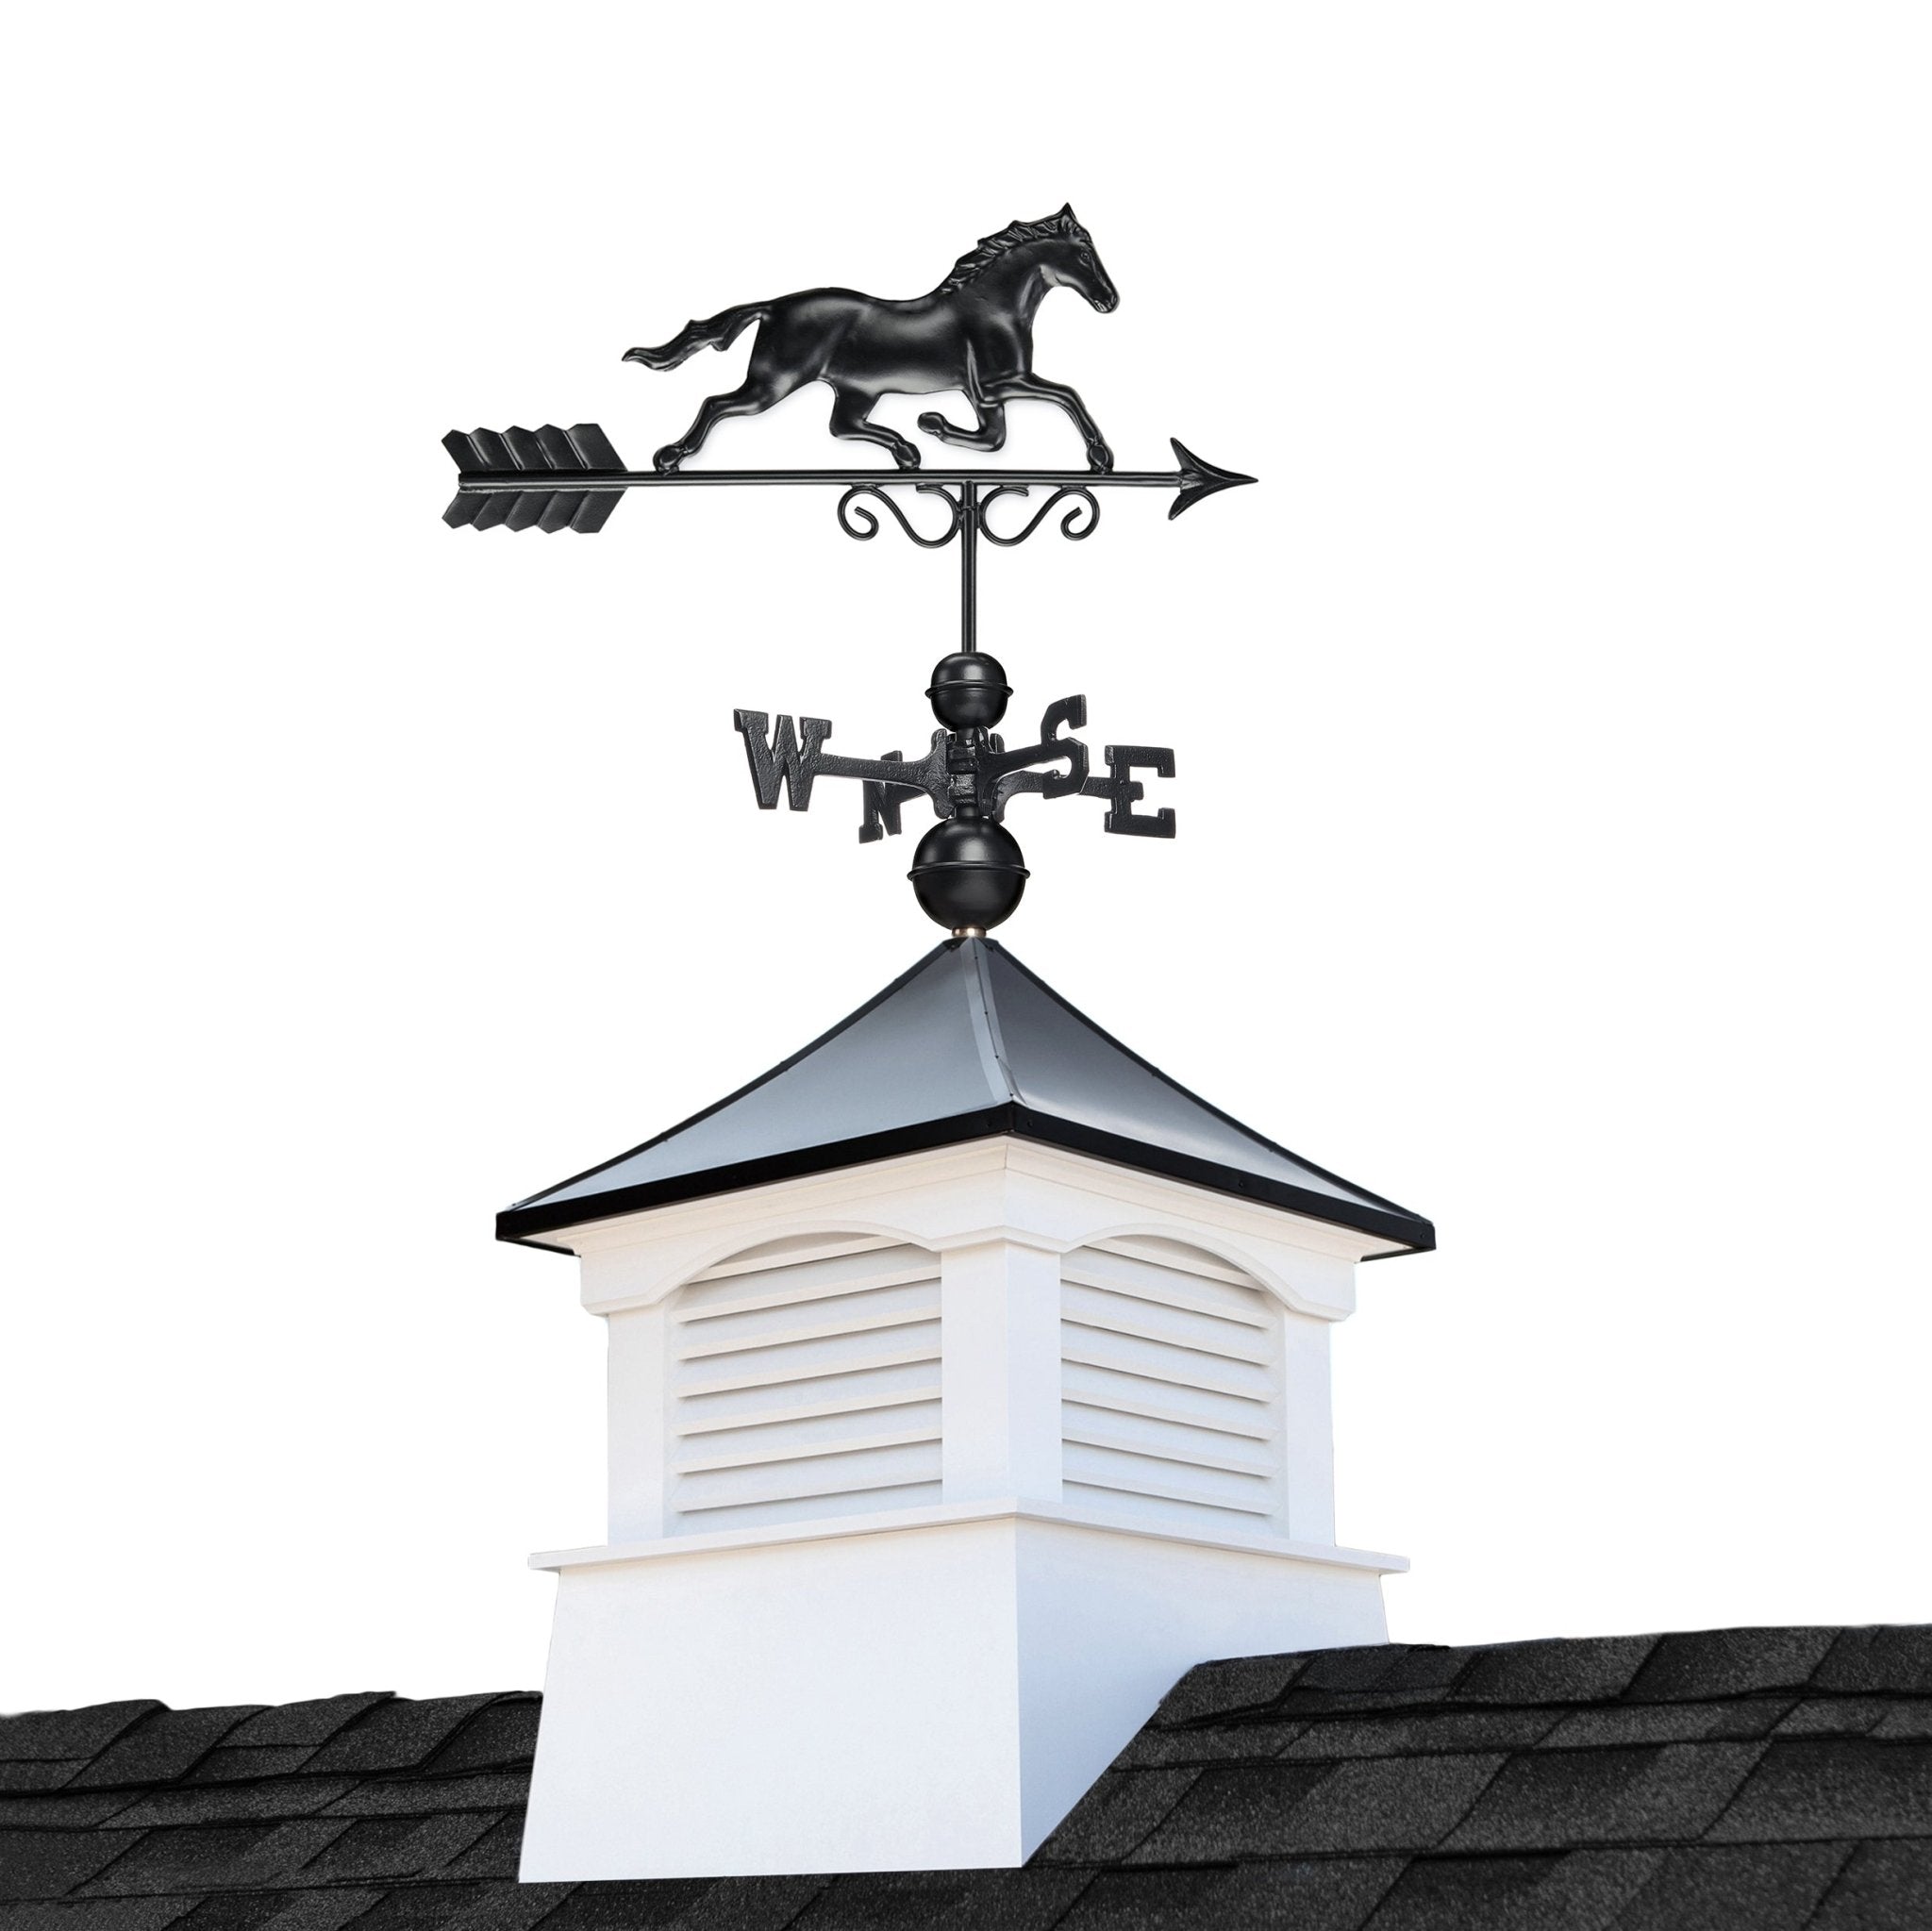 18" Square Coventry Vinyl Cupola with Black Aluminum roof and Black Aluminum Horse Weathervane - Good Directions